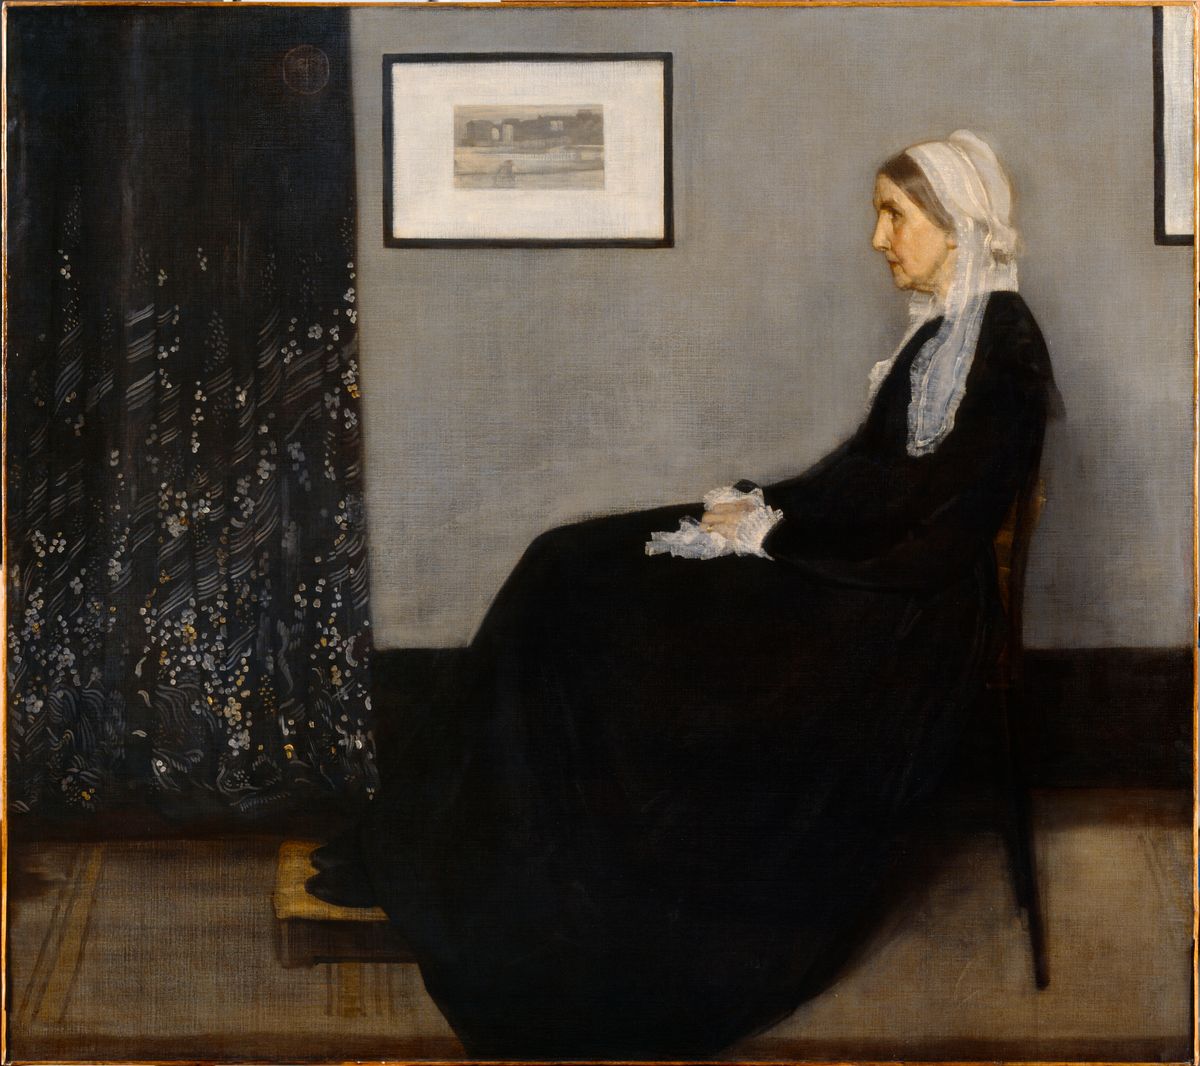 James Abbott McNeill Whistler, Arrangement in Gray and Black No 1 (Portrait of the Artist's Mother), 1871 RMN-Grand Palais / Art Resource, NY